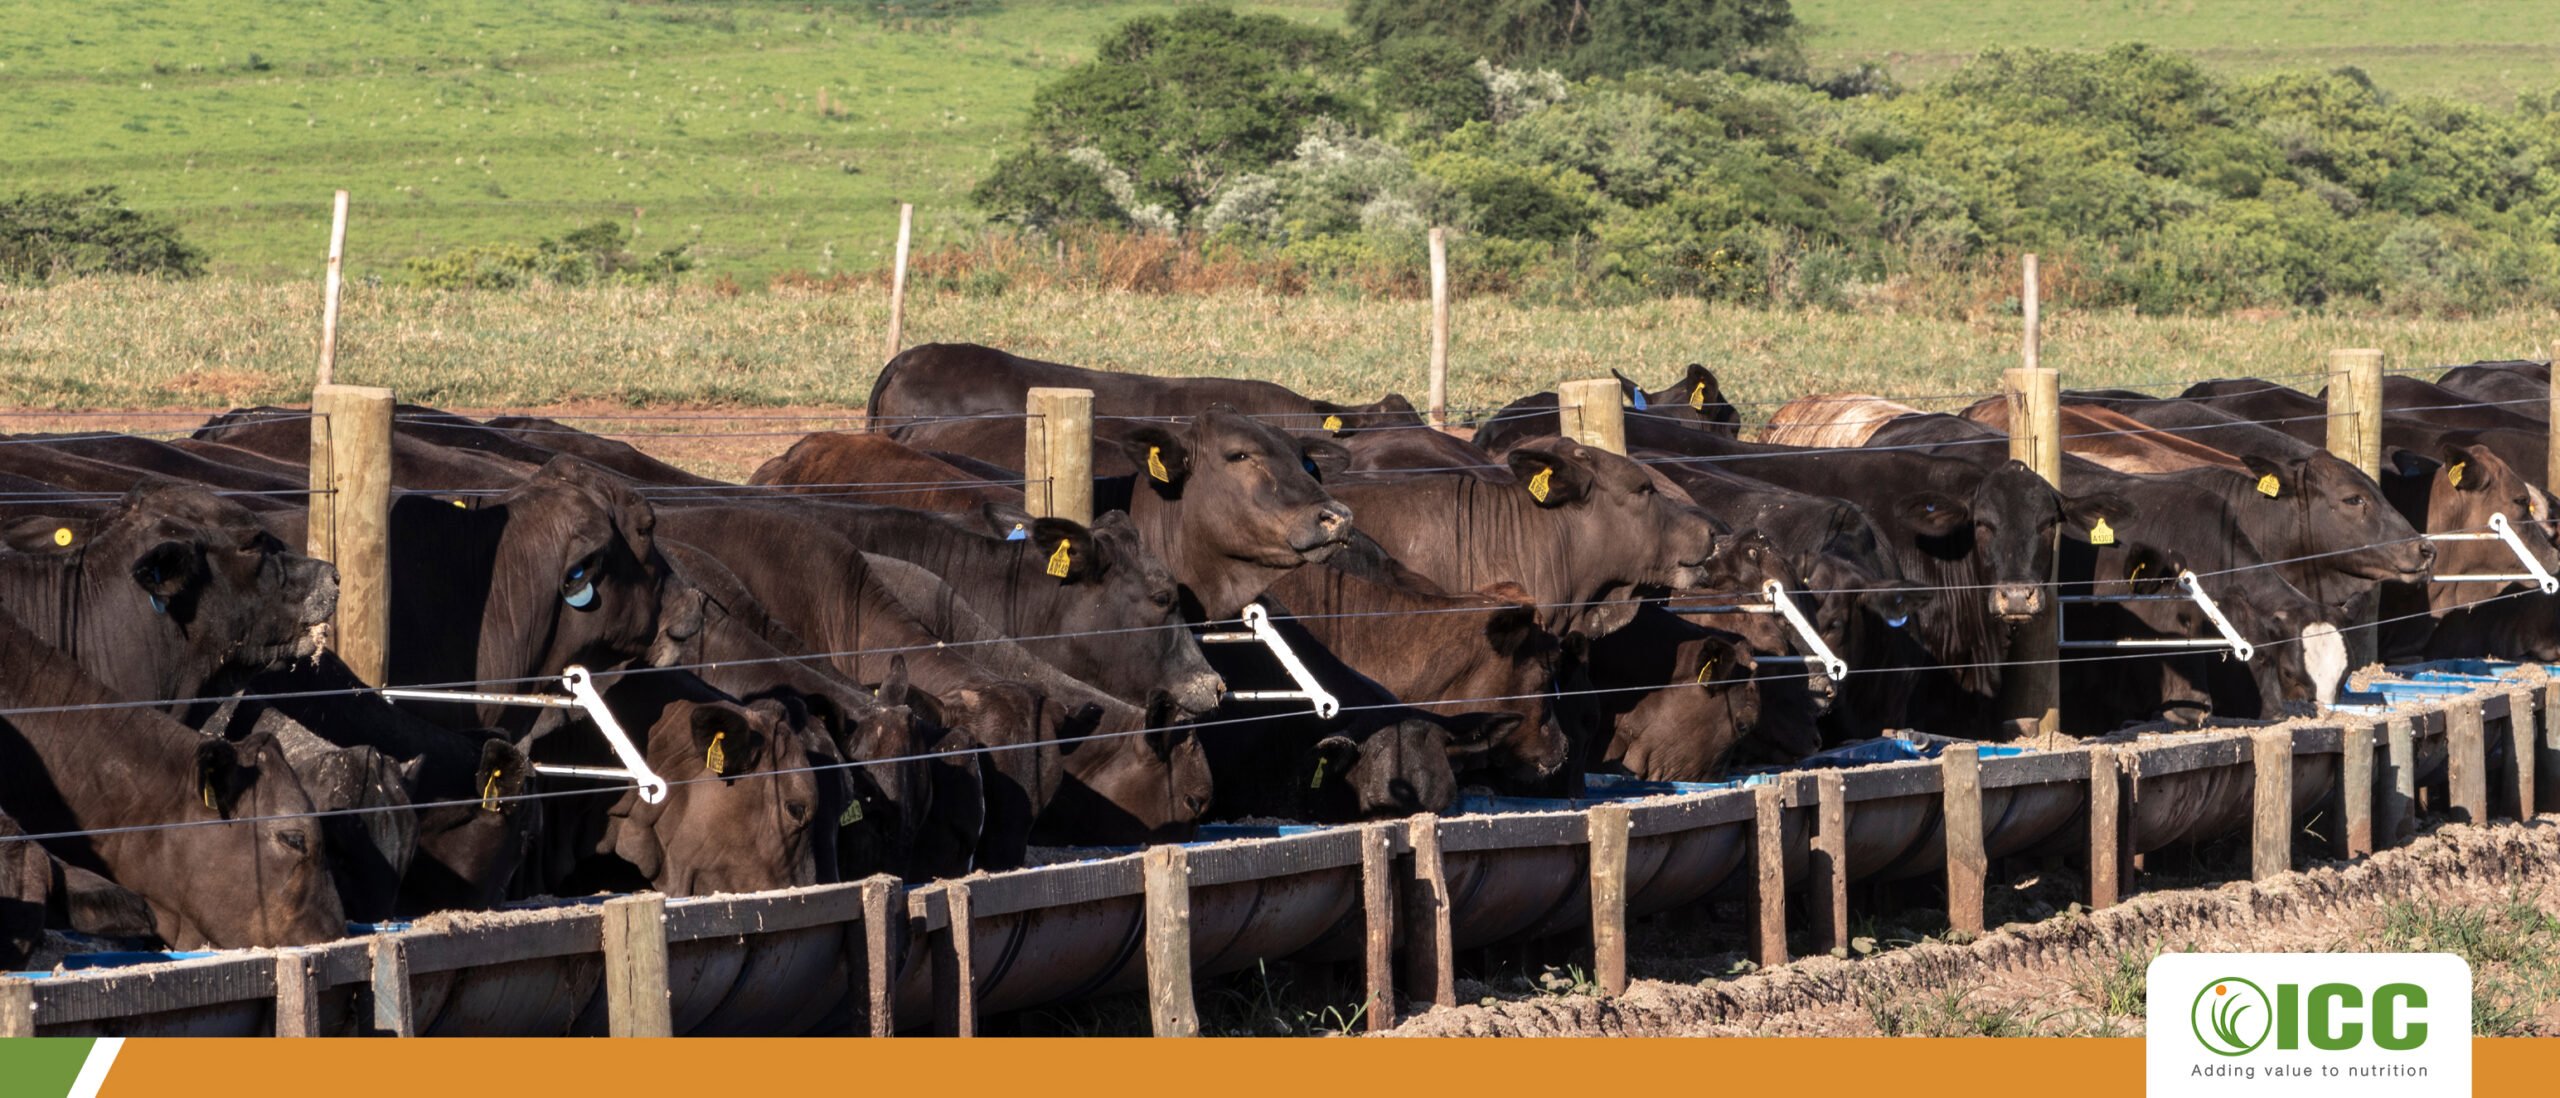 Animal welfare and facilities in cattle farming